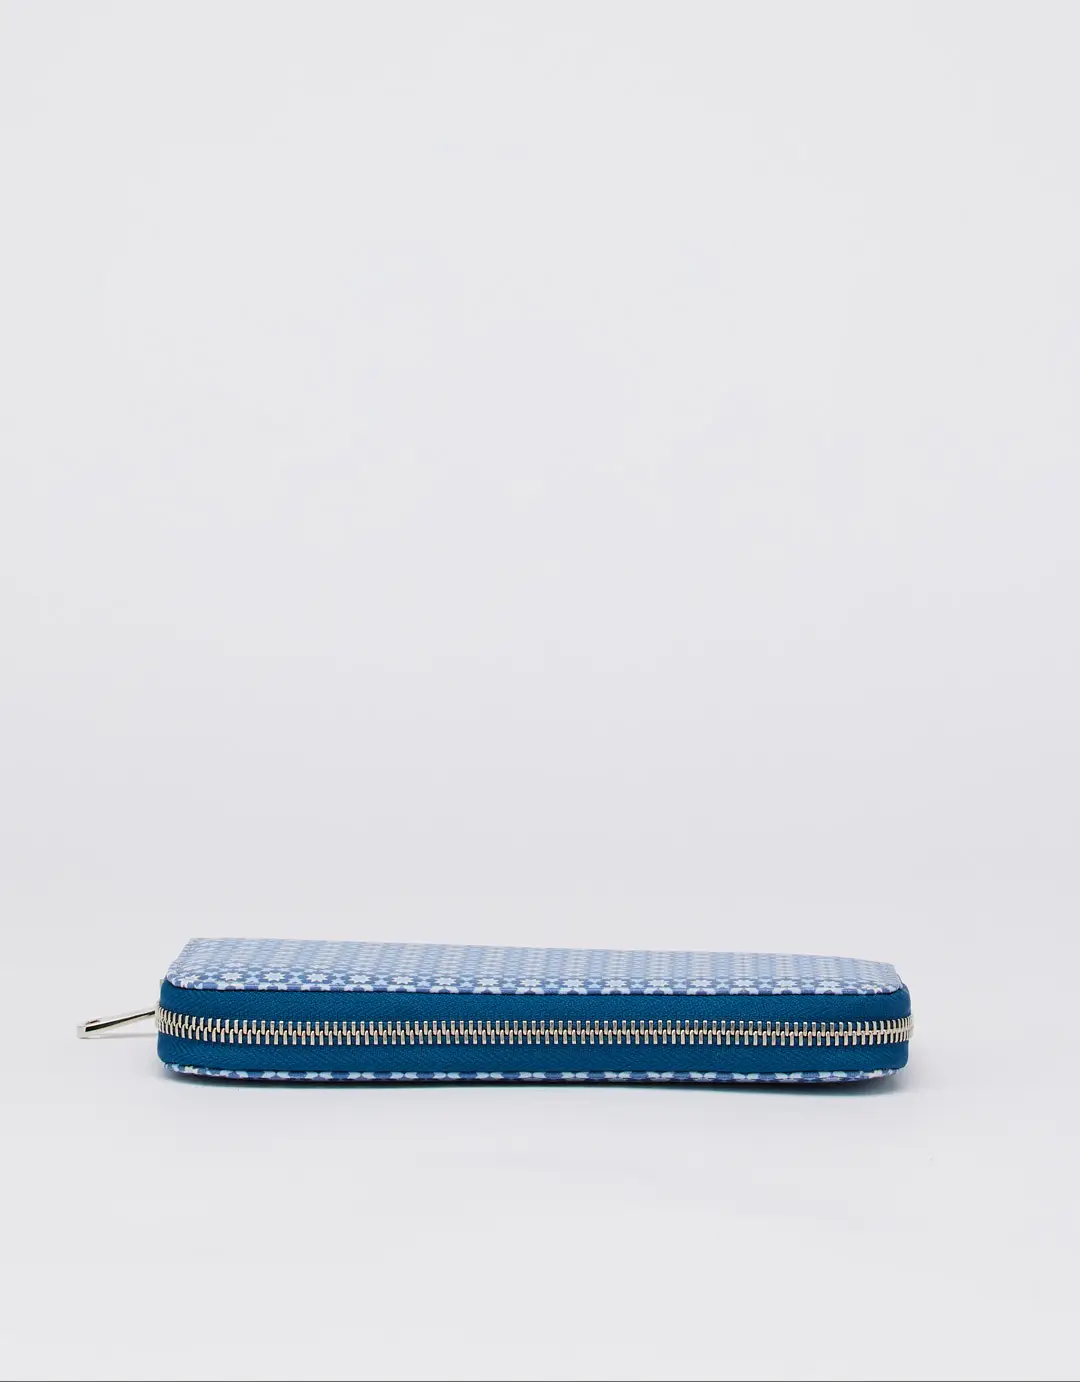 This beautiful wallet is made with high quality materials so the iconic touch of the mosaic completes the slender shape, this wallet is distinguished by a full zip closure and a well-organized interior. Ingenious, it can be used as a pocket.